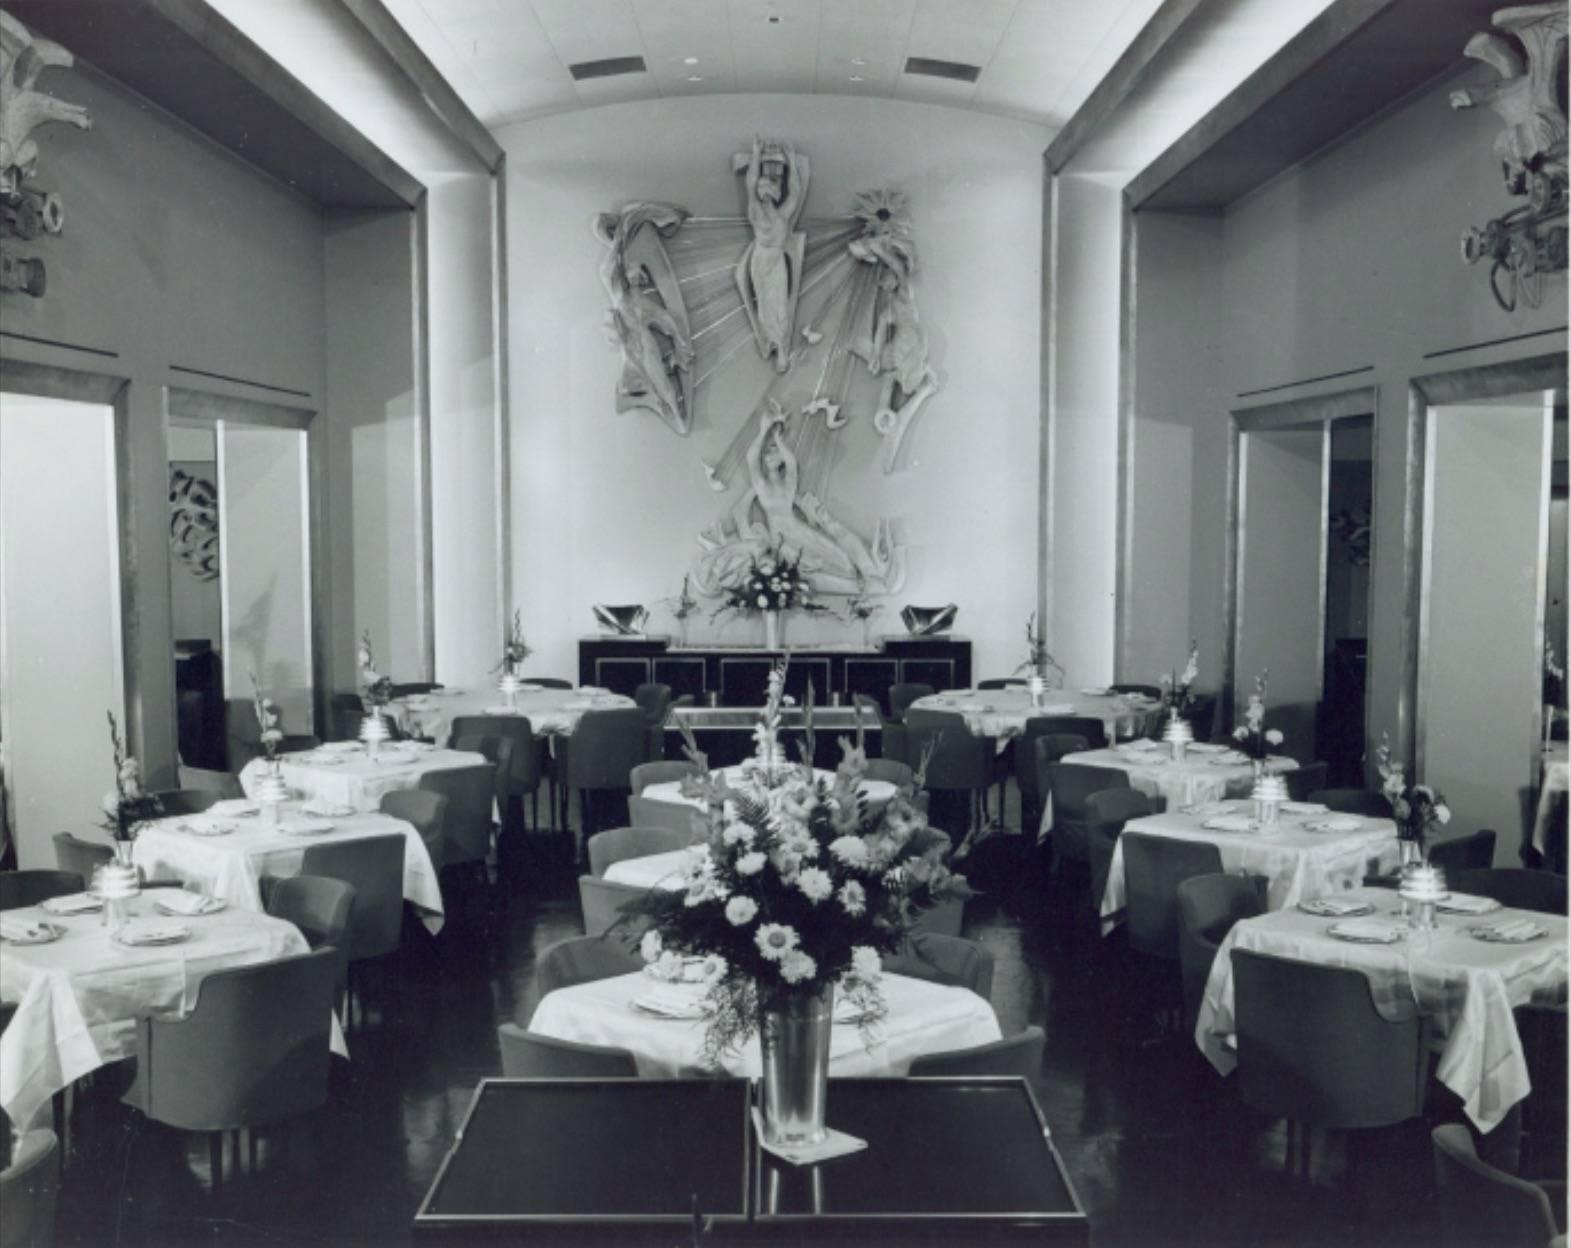 Aluminum Set of Four Chairs from the First Class Dining Room of the S.S. United States